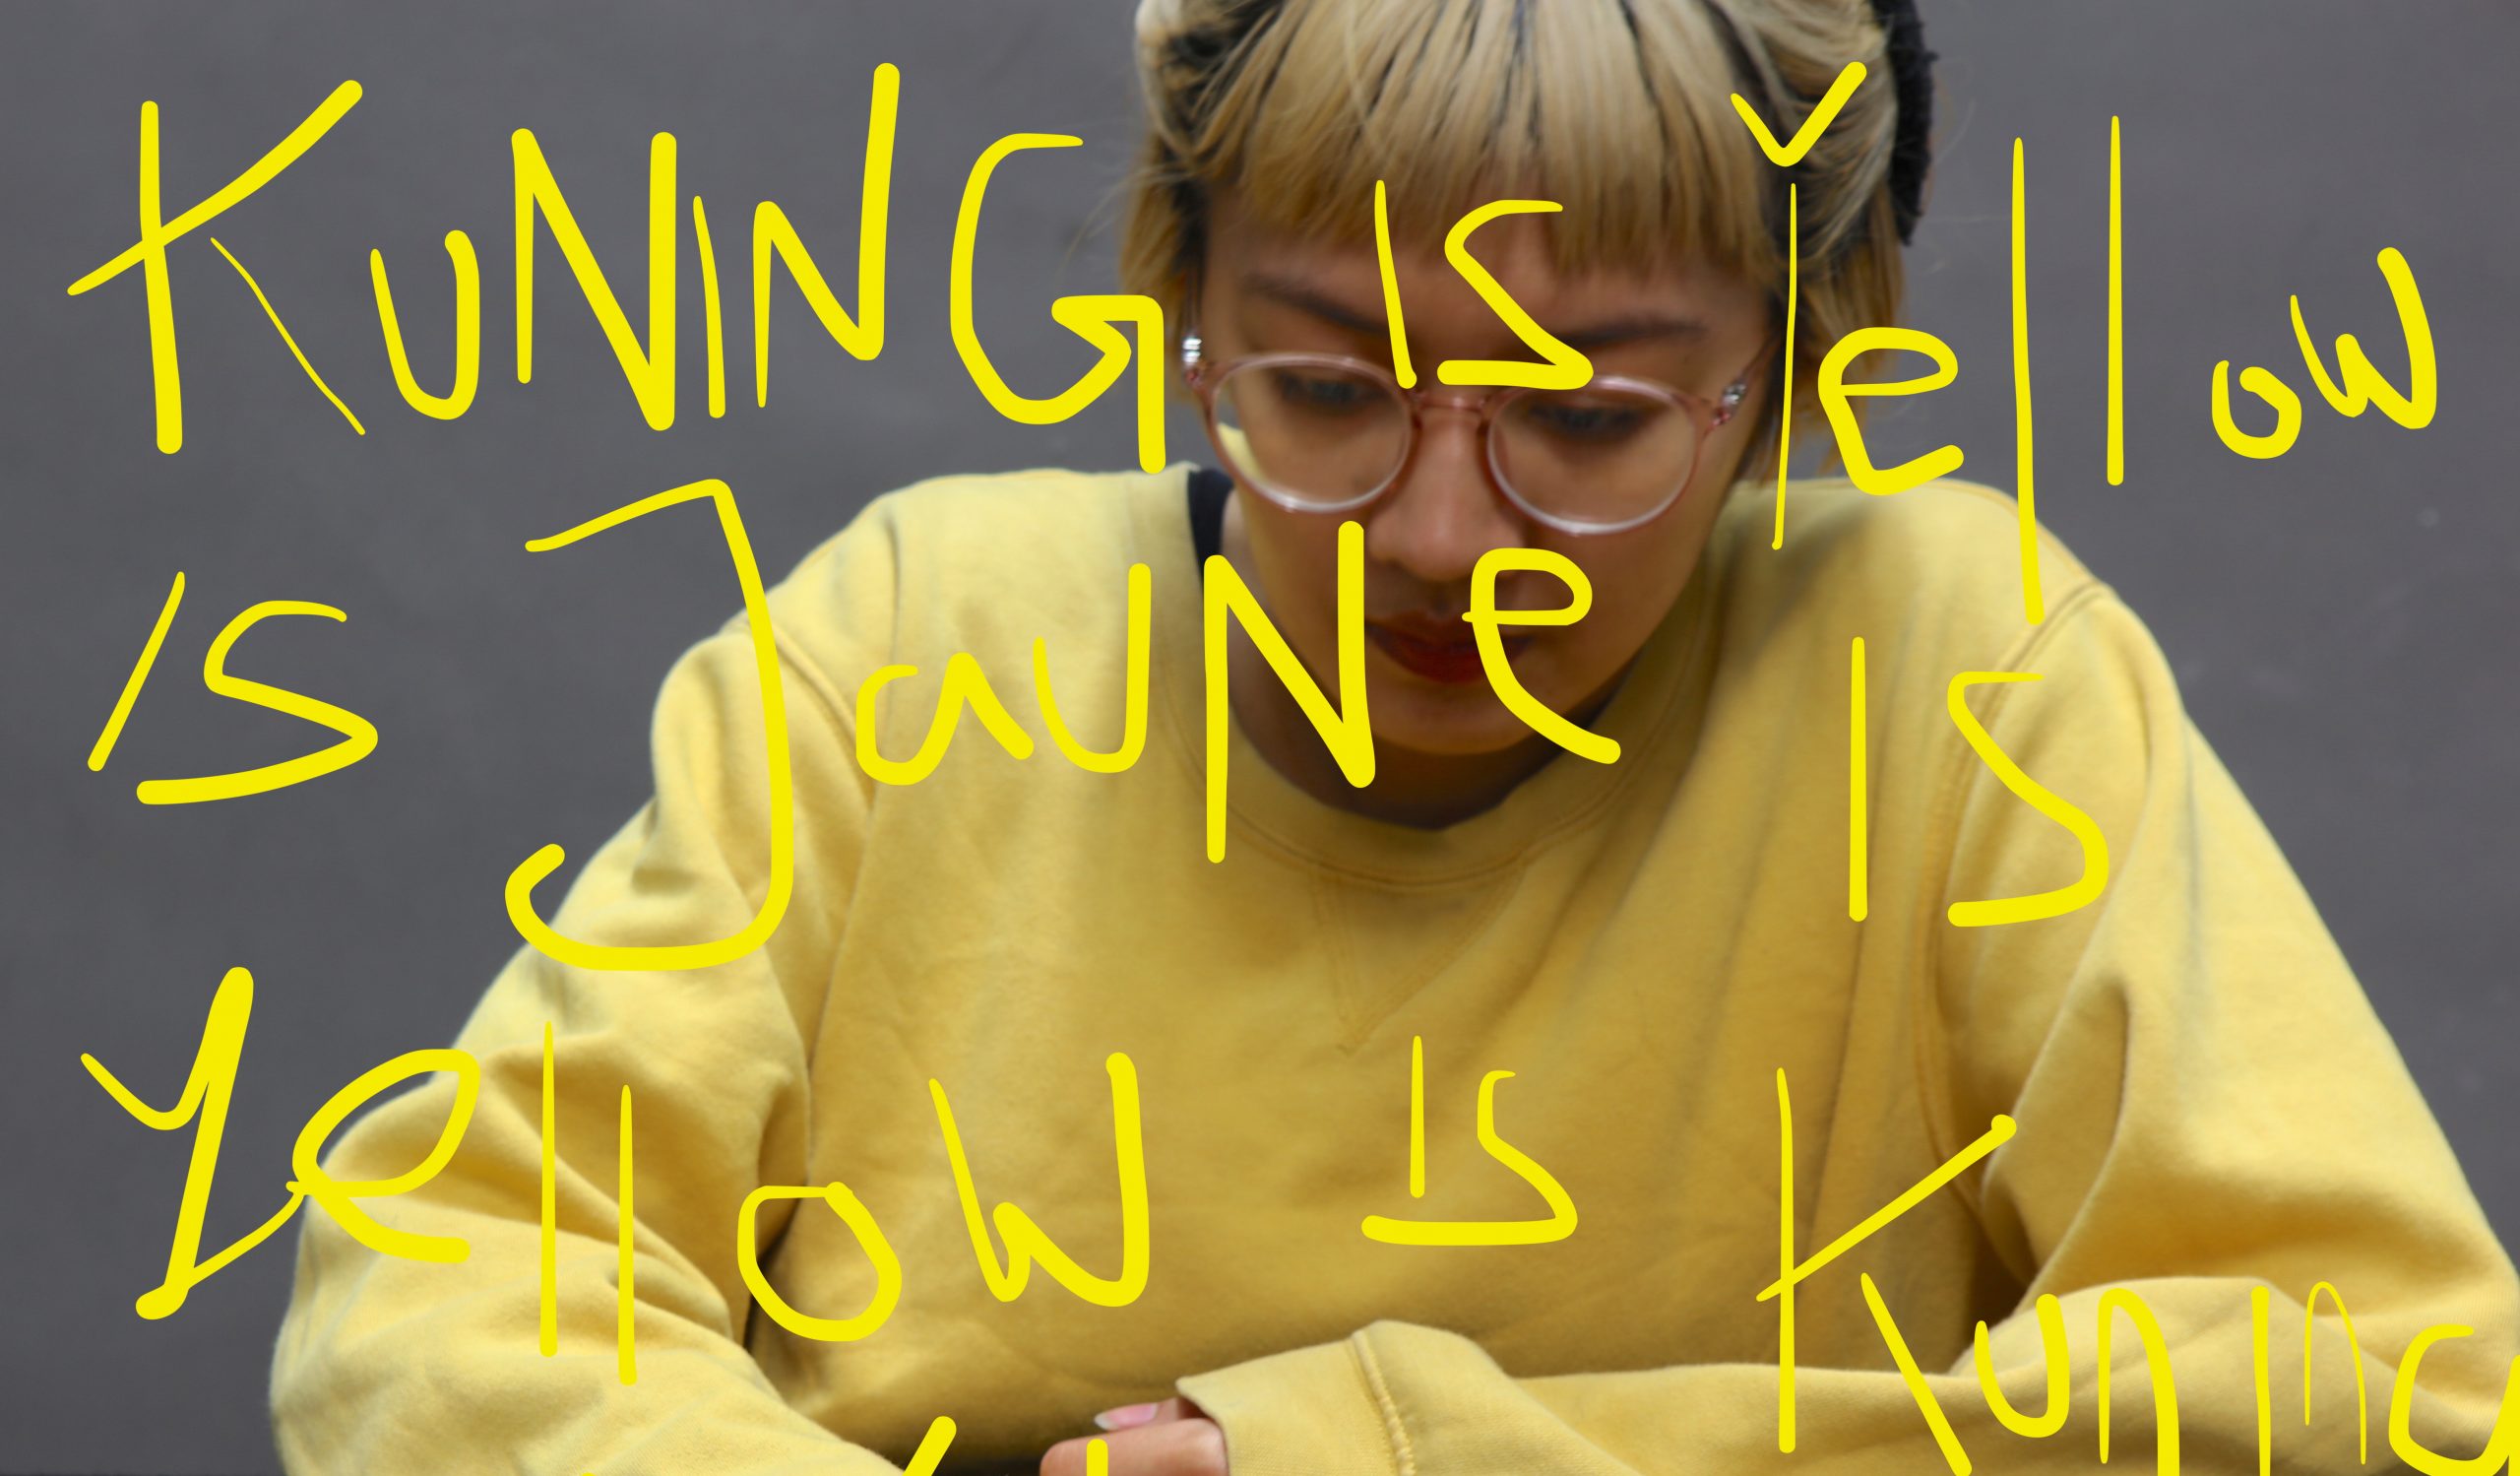 Yellow text written 'Kuning is Yellow is Jaune is Yellow is tuning is Yellow' in the colour yellow with the artist wearing a yellow sweater in the grey background.